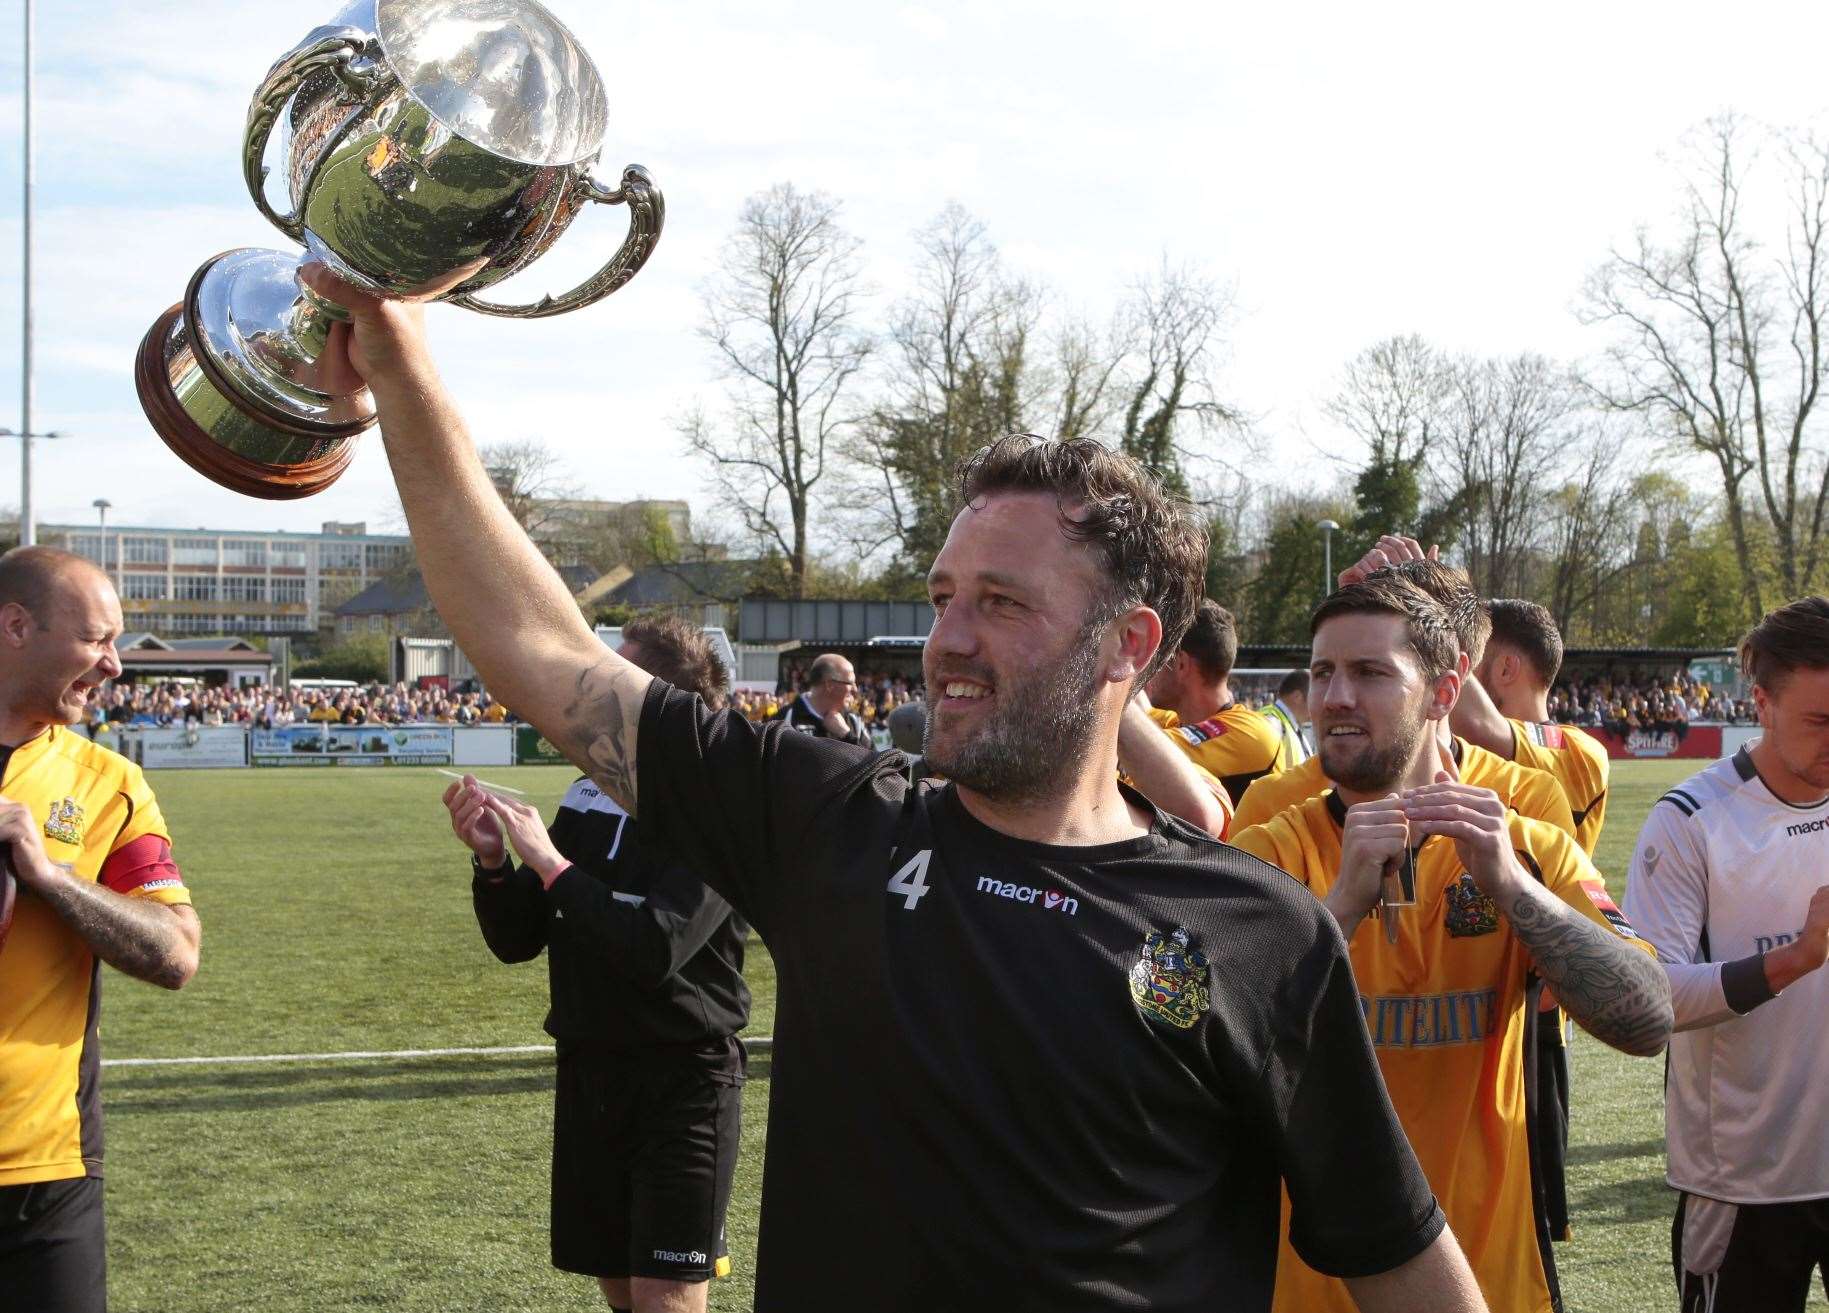 Happier times for Jay Saunders as he celebrates leading Maidstone to the 2014/15 Ryman League Premier Division title Picture: Martin Apps